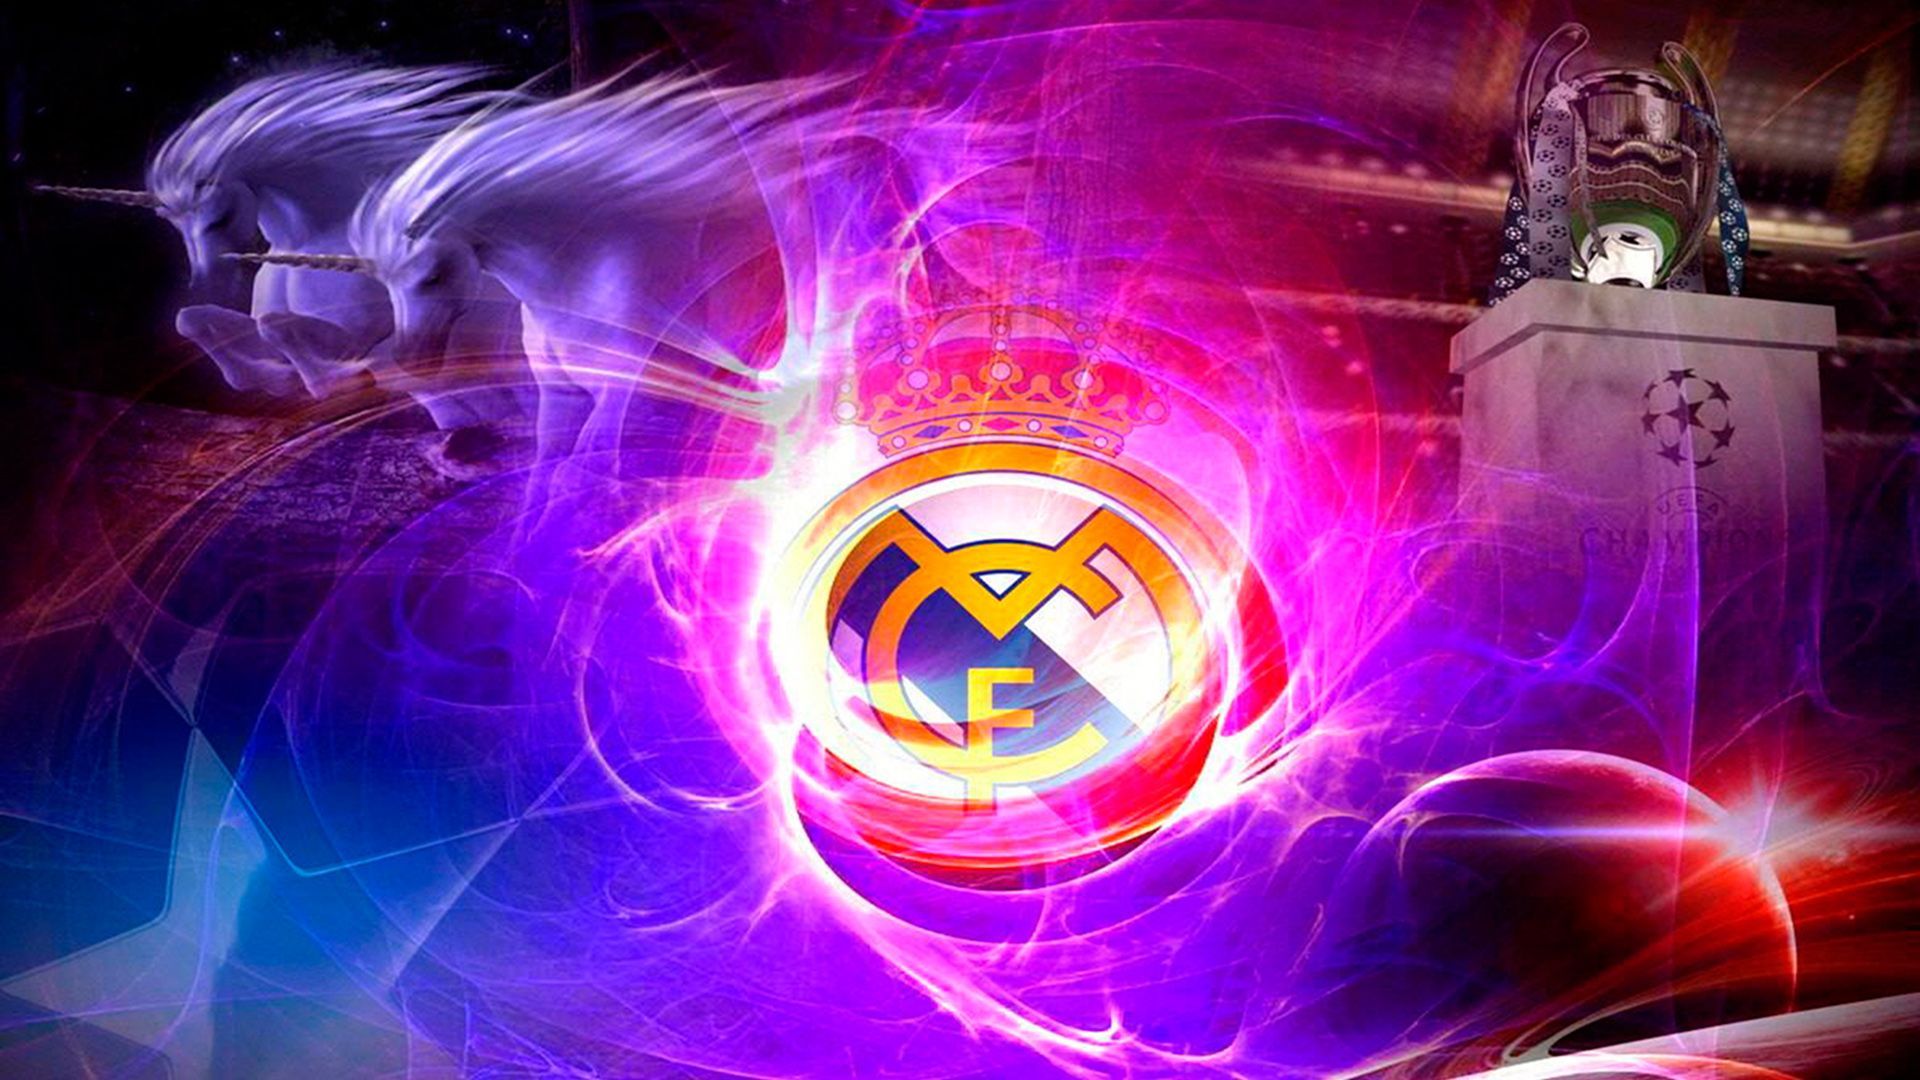 Download Real Madrid Wallpaper HD Background #41111 - Download ...